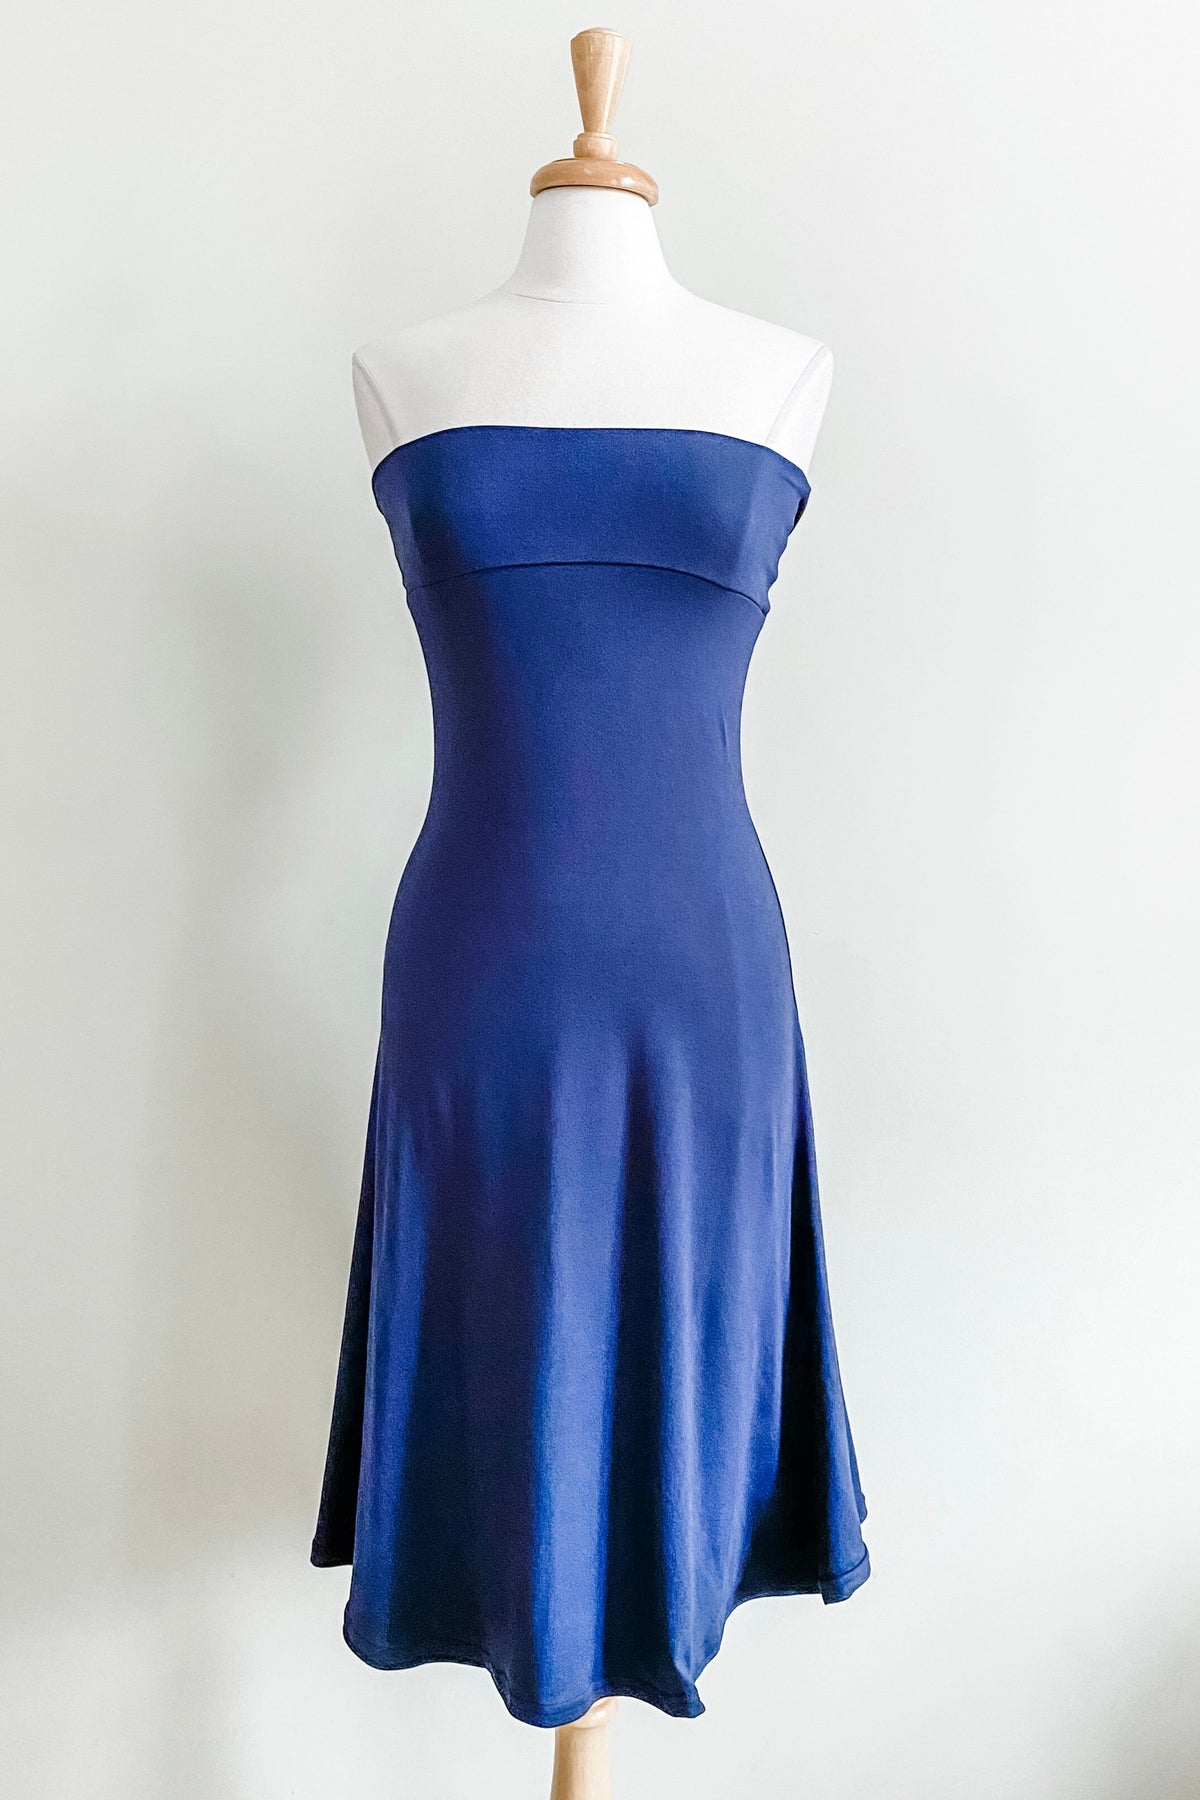 Diane Kroe Wear-Ever Skirt Dress (Navy) - The Classic Capsule Collection